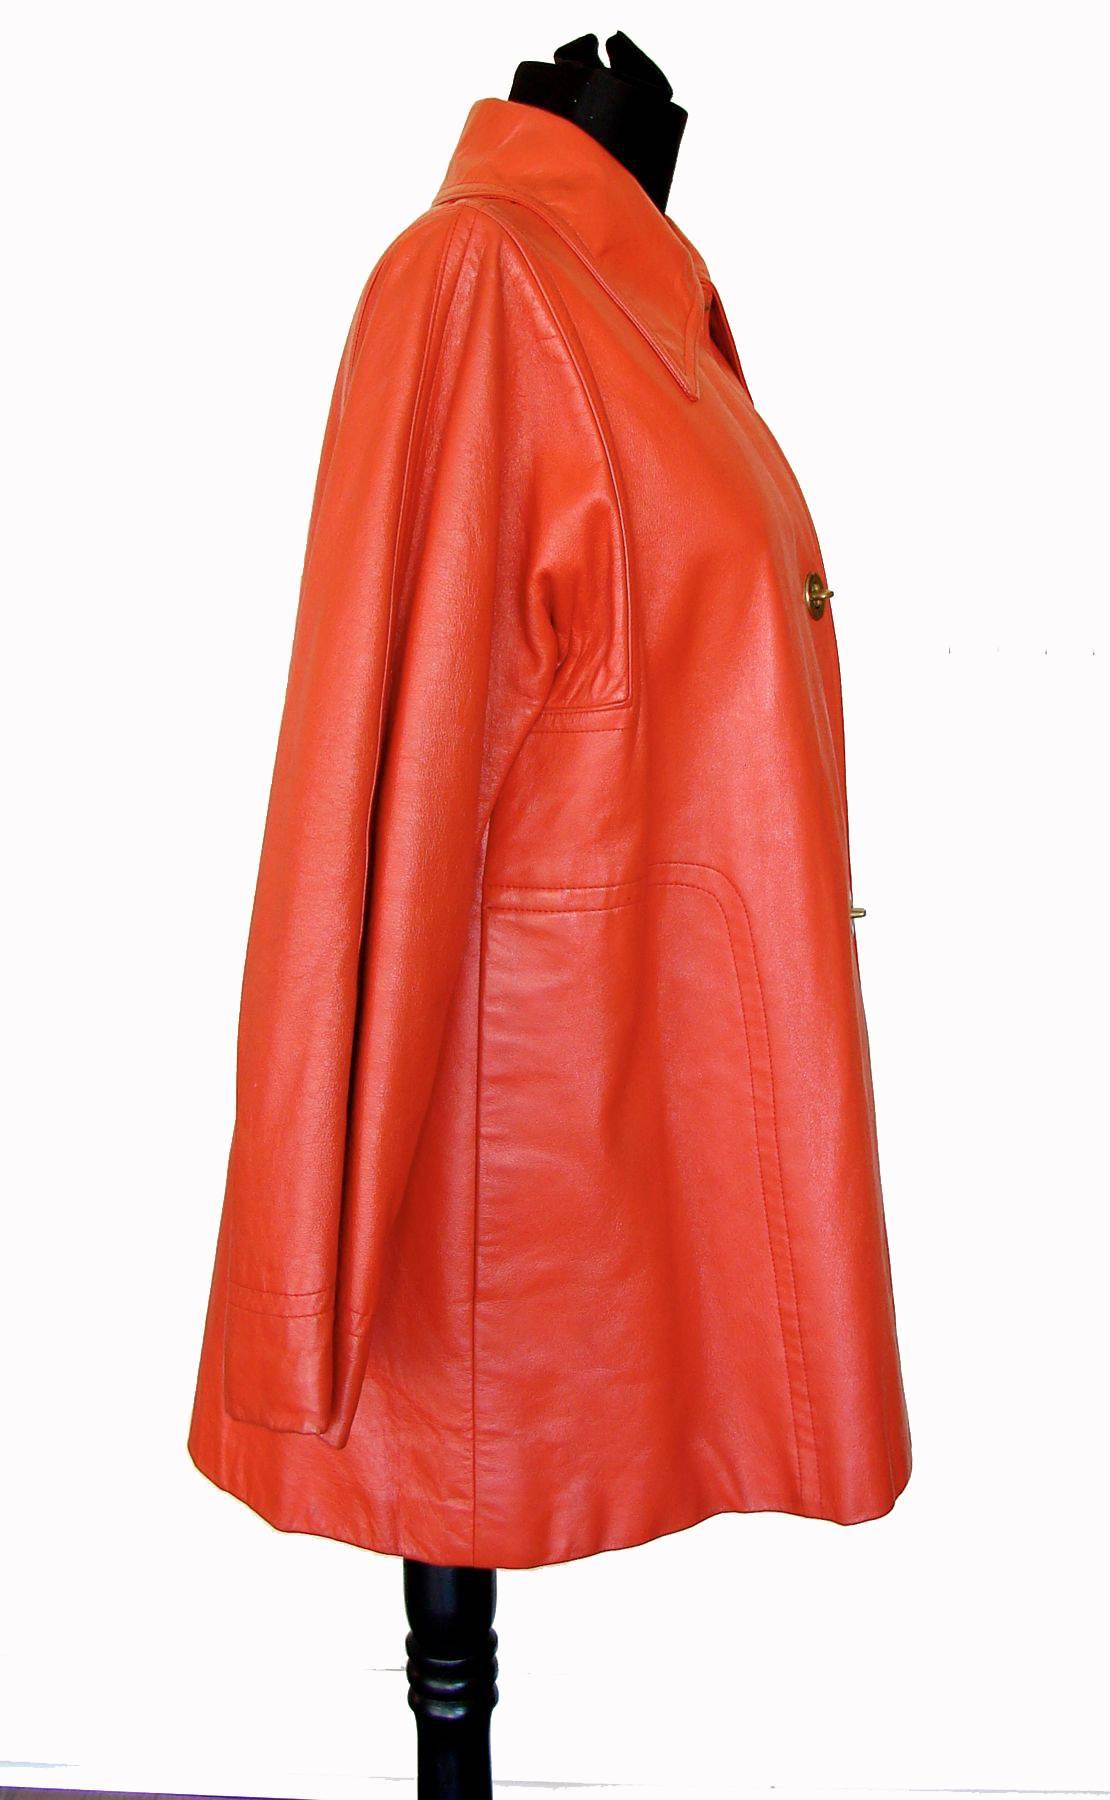 Red Bonnie Cashin for Sills Orange Leather Jacket Attached Hobo Bag Purse 1960s